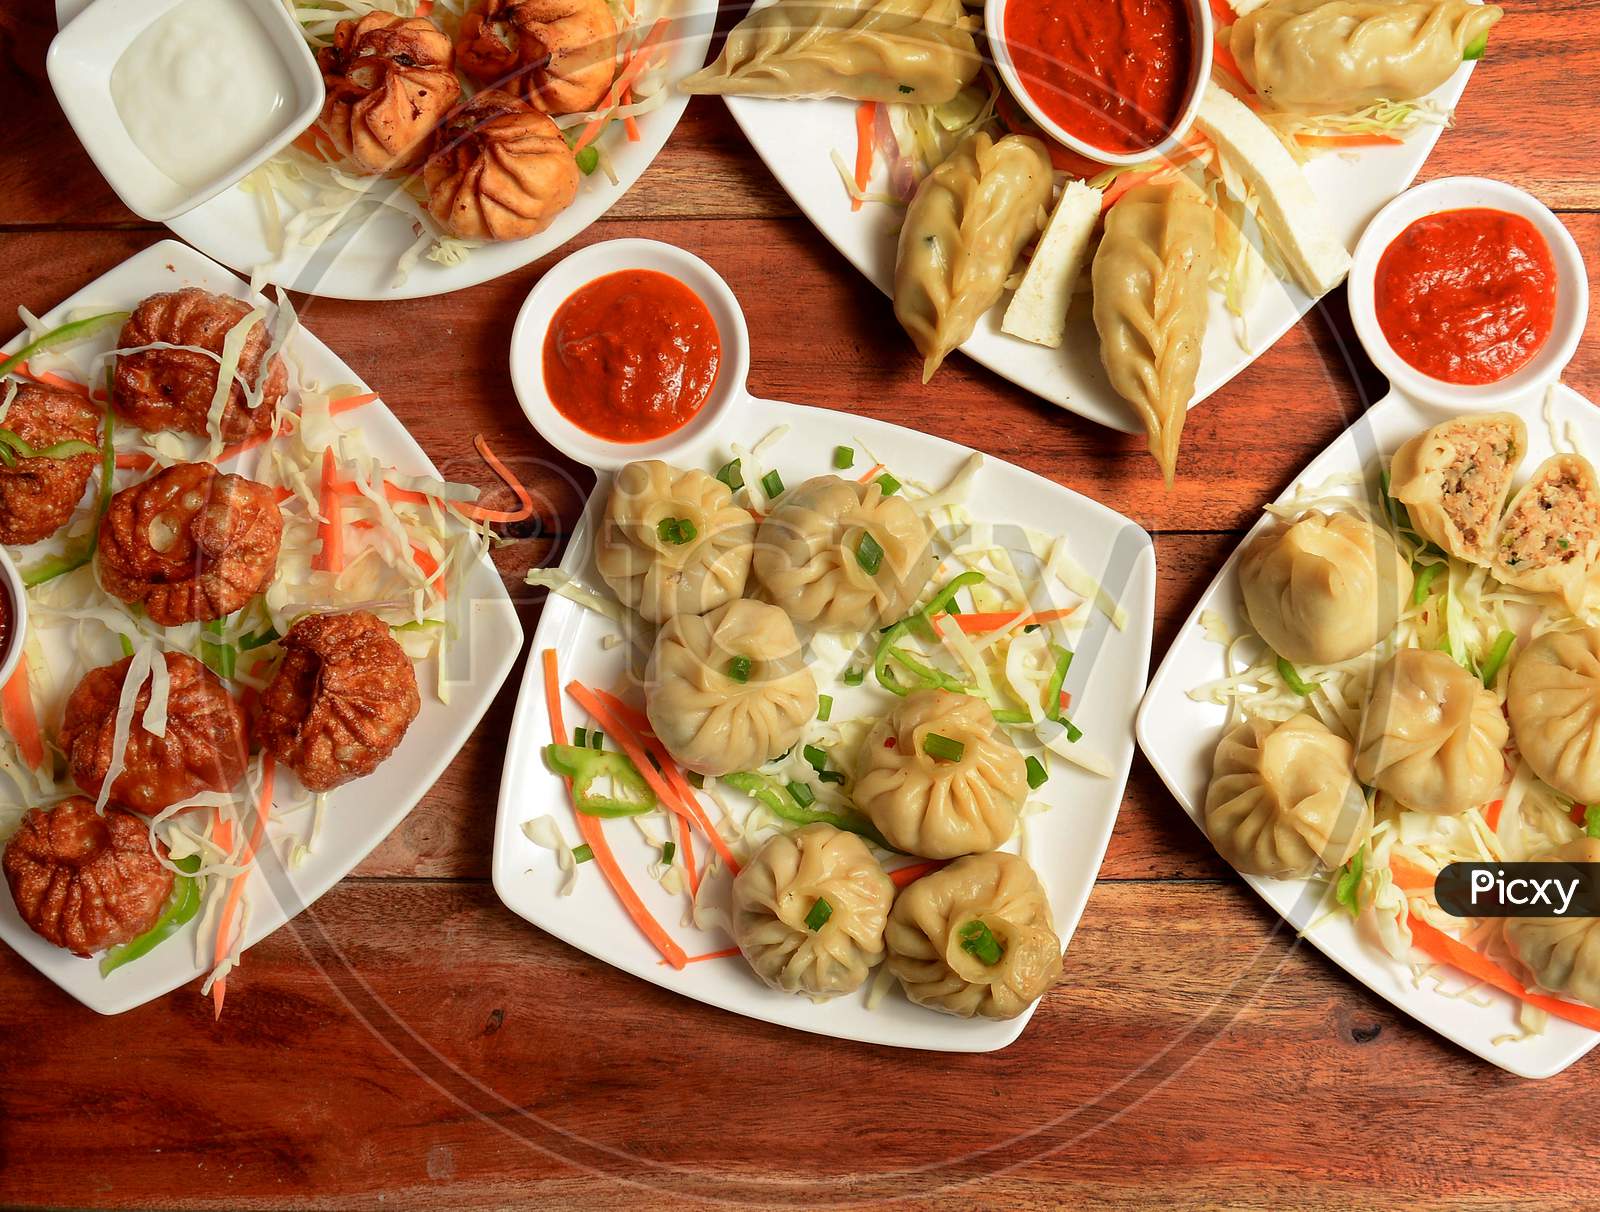 Variety Of Nepalese Traditional Dumpling Momos Served With Tomato Ketchup And Fresh Salad.